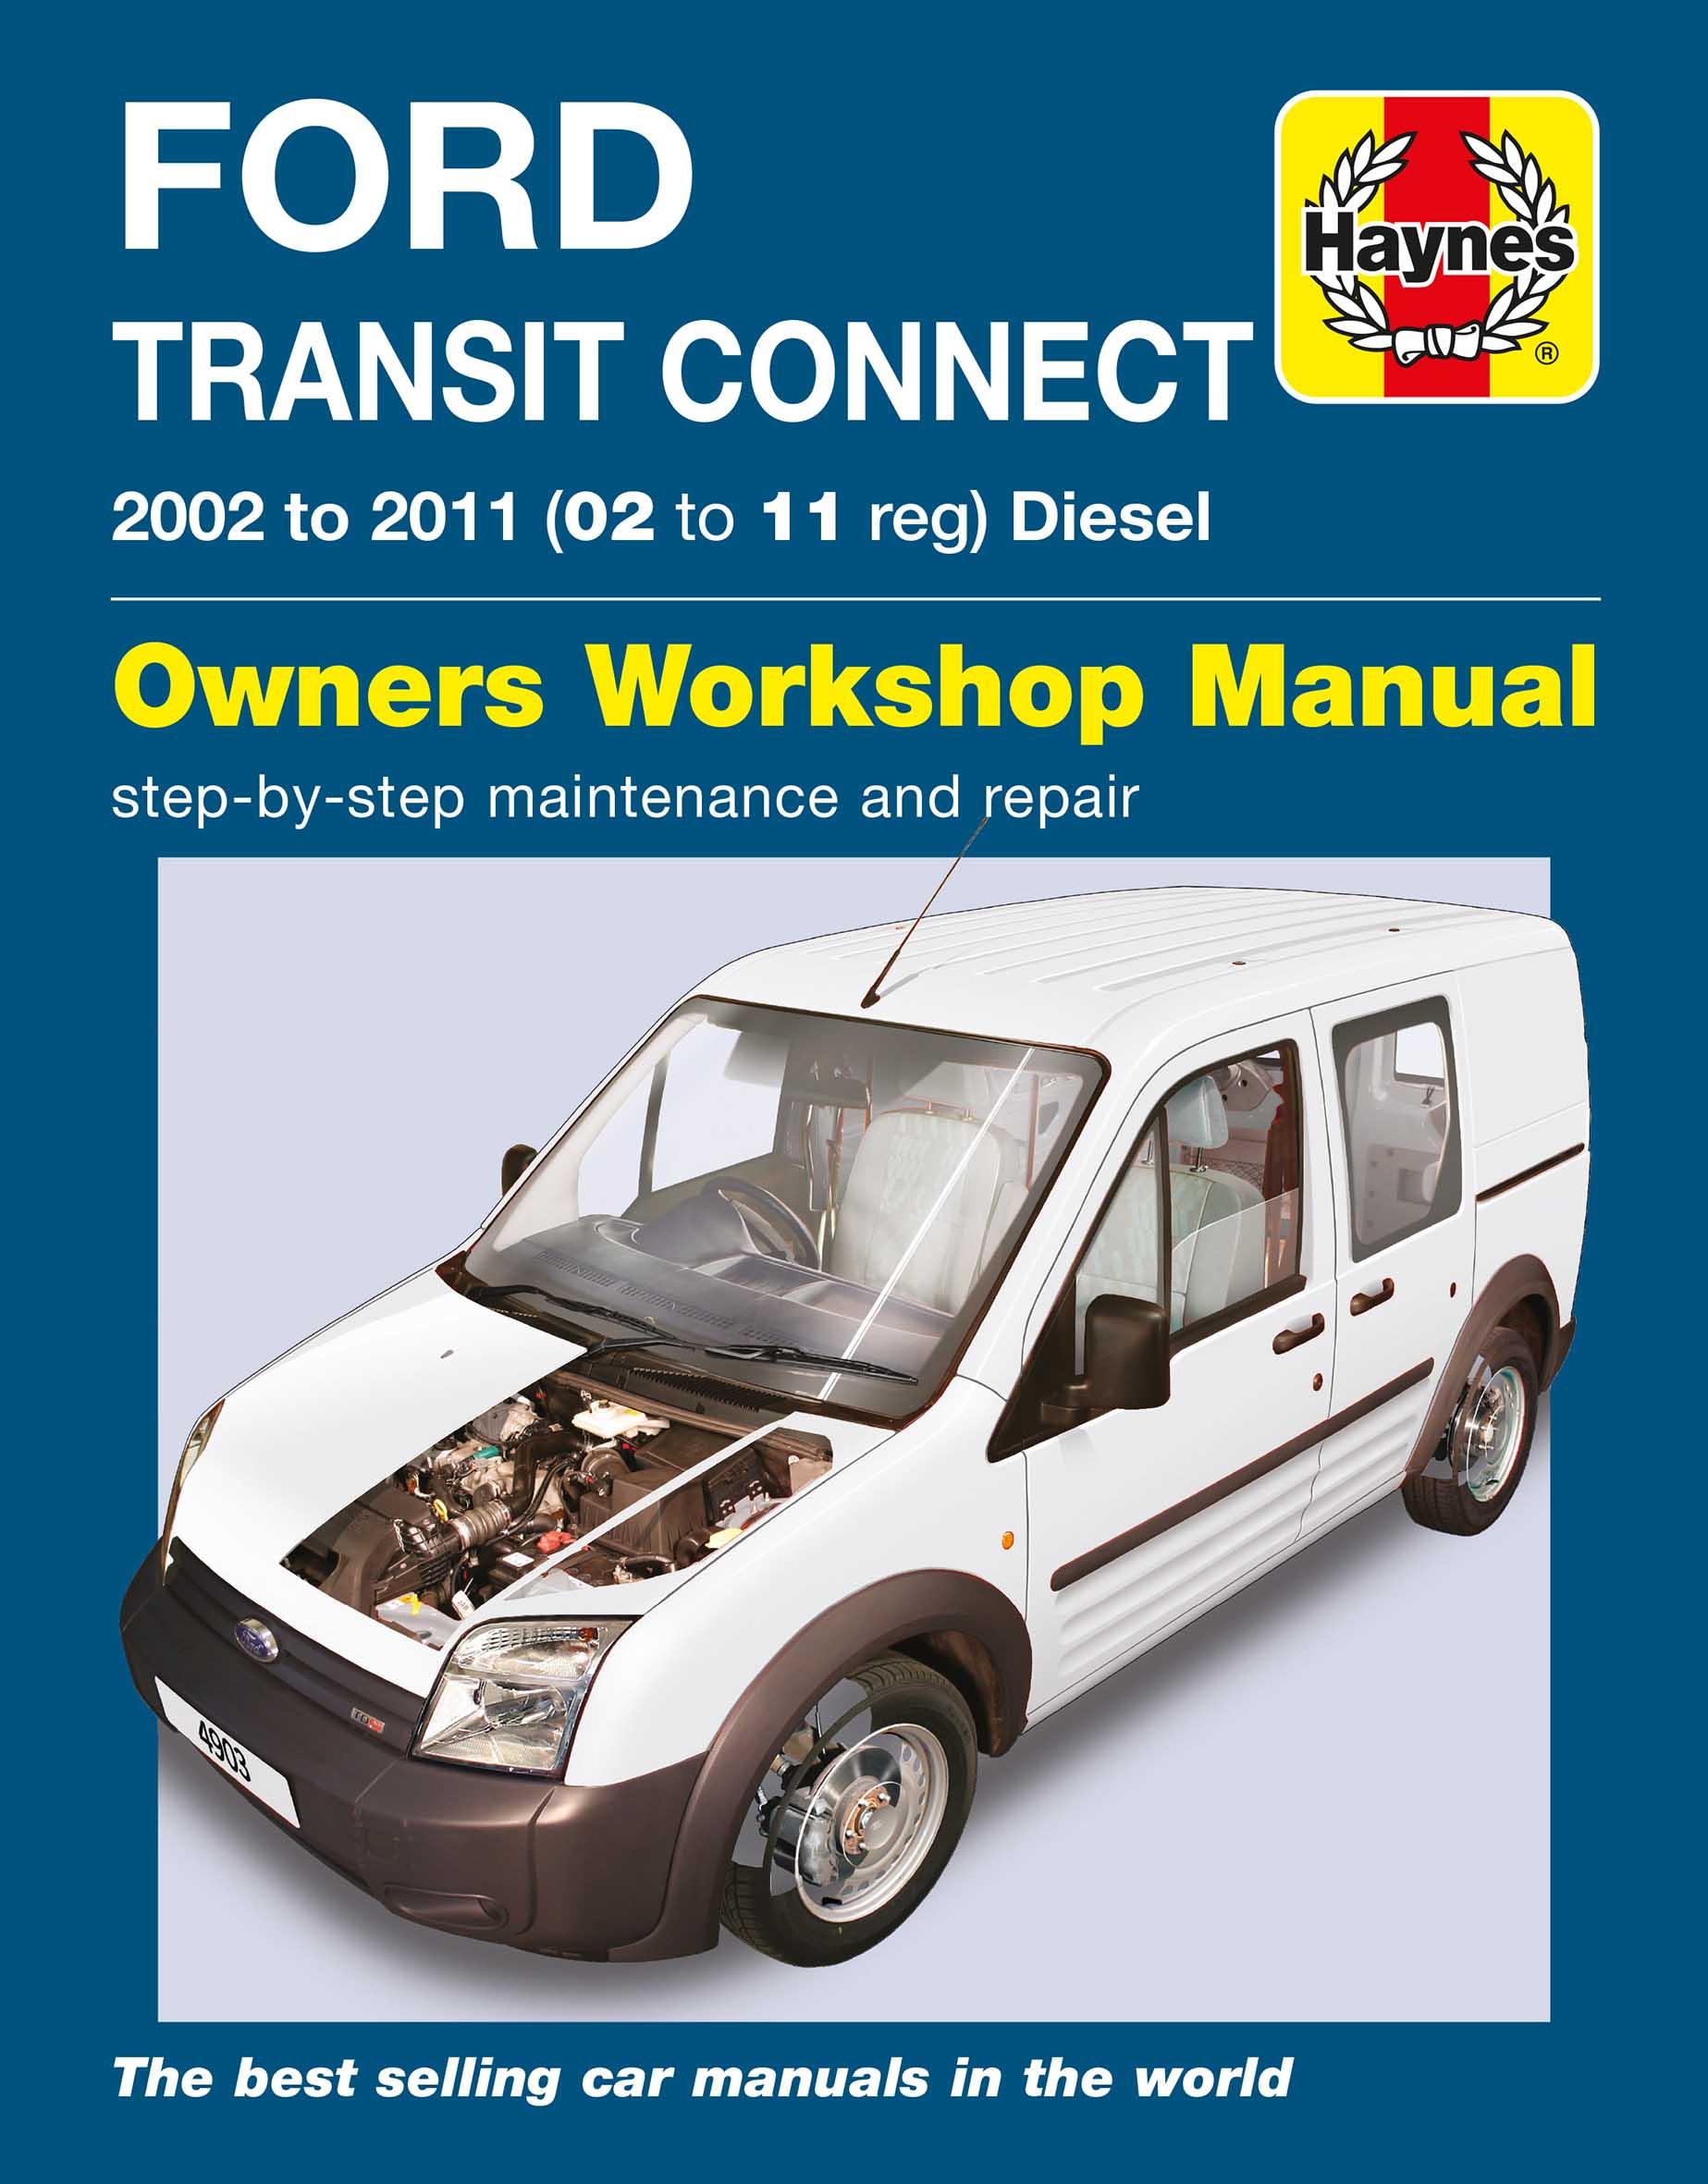 Ford transit connect shop manual #1